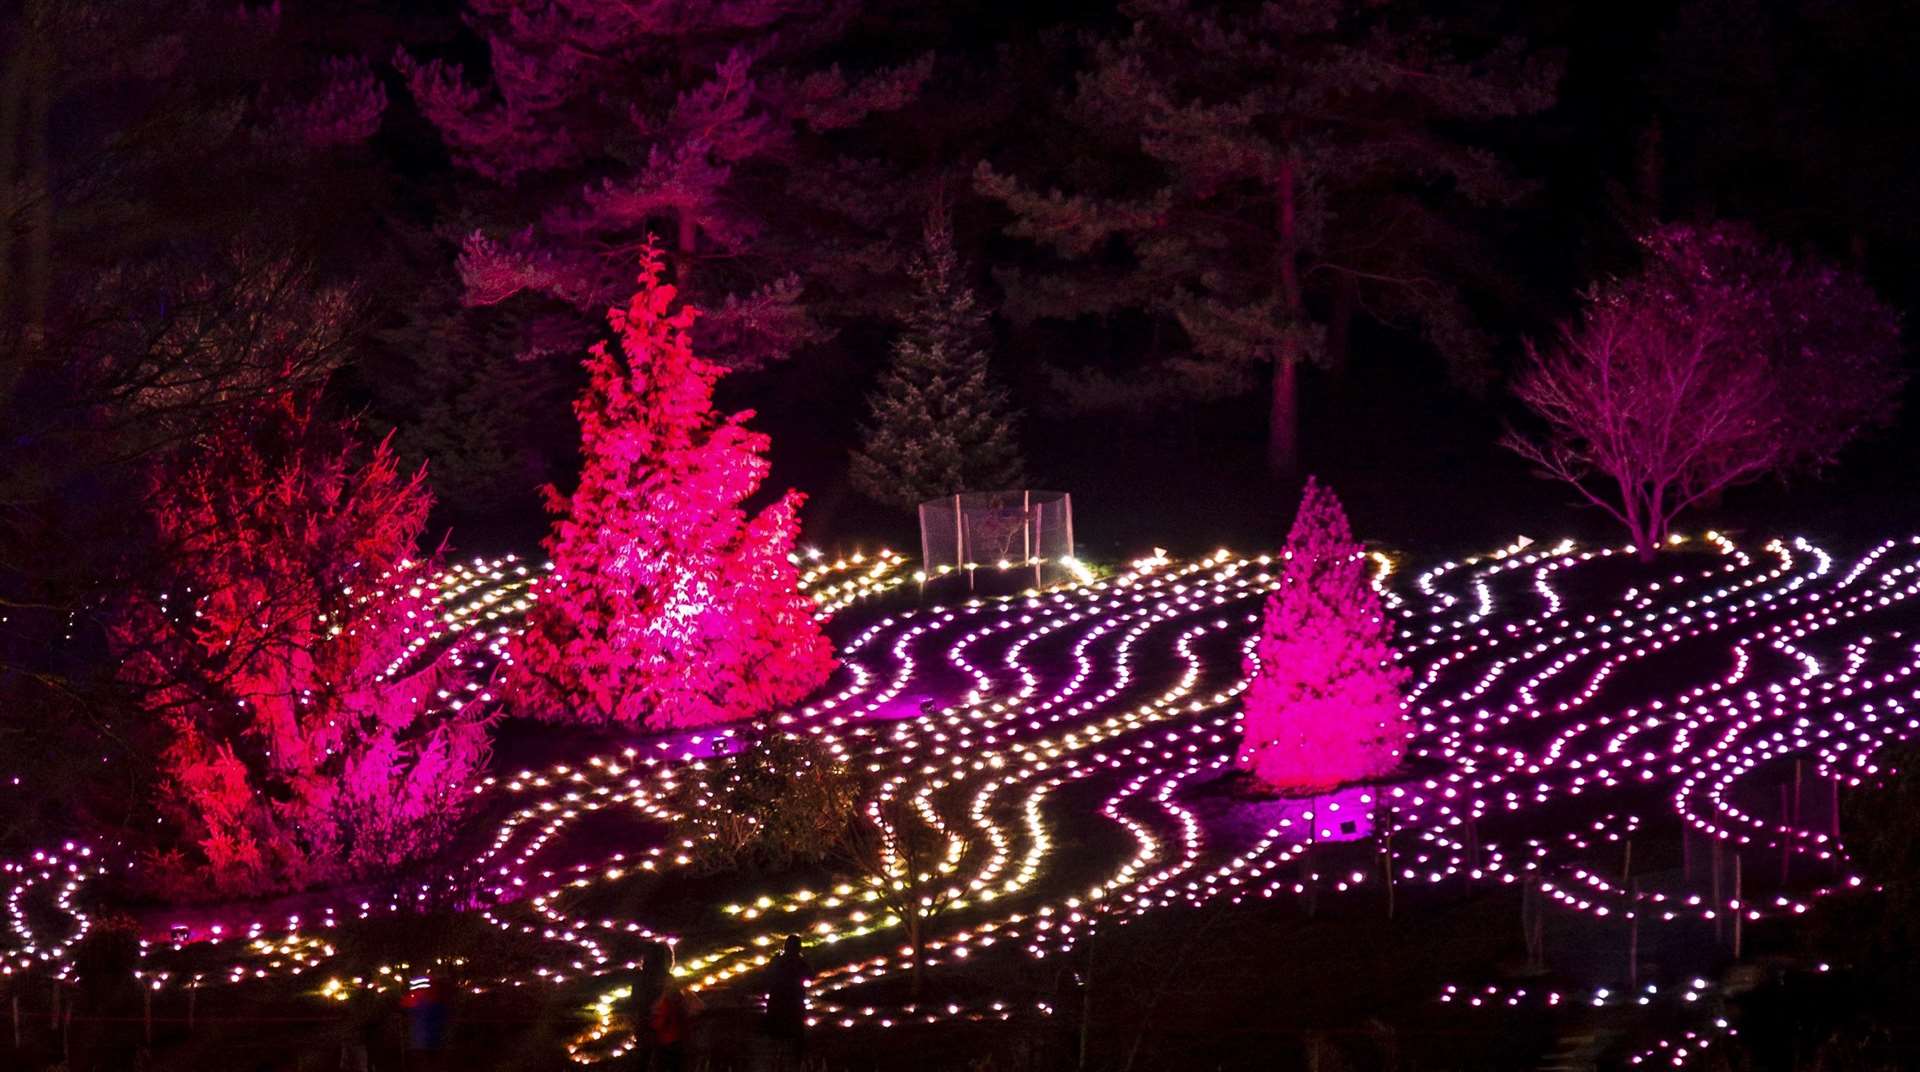 The Christmas at Bedgebury Field of Light Picture: Rikard Osterlund